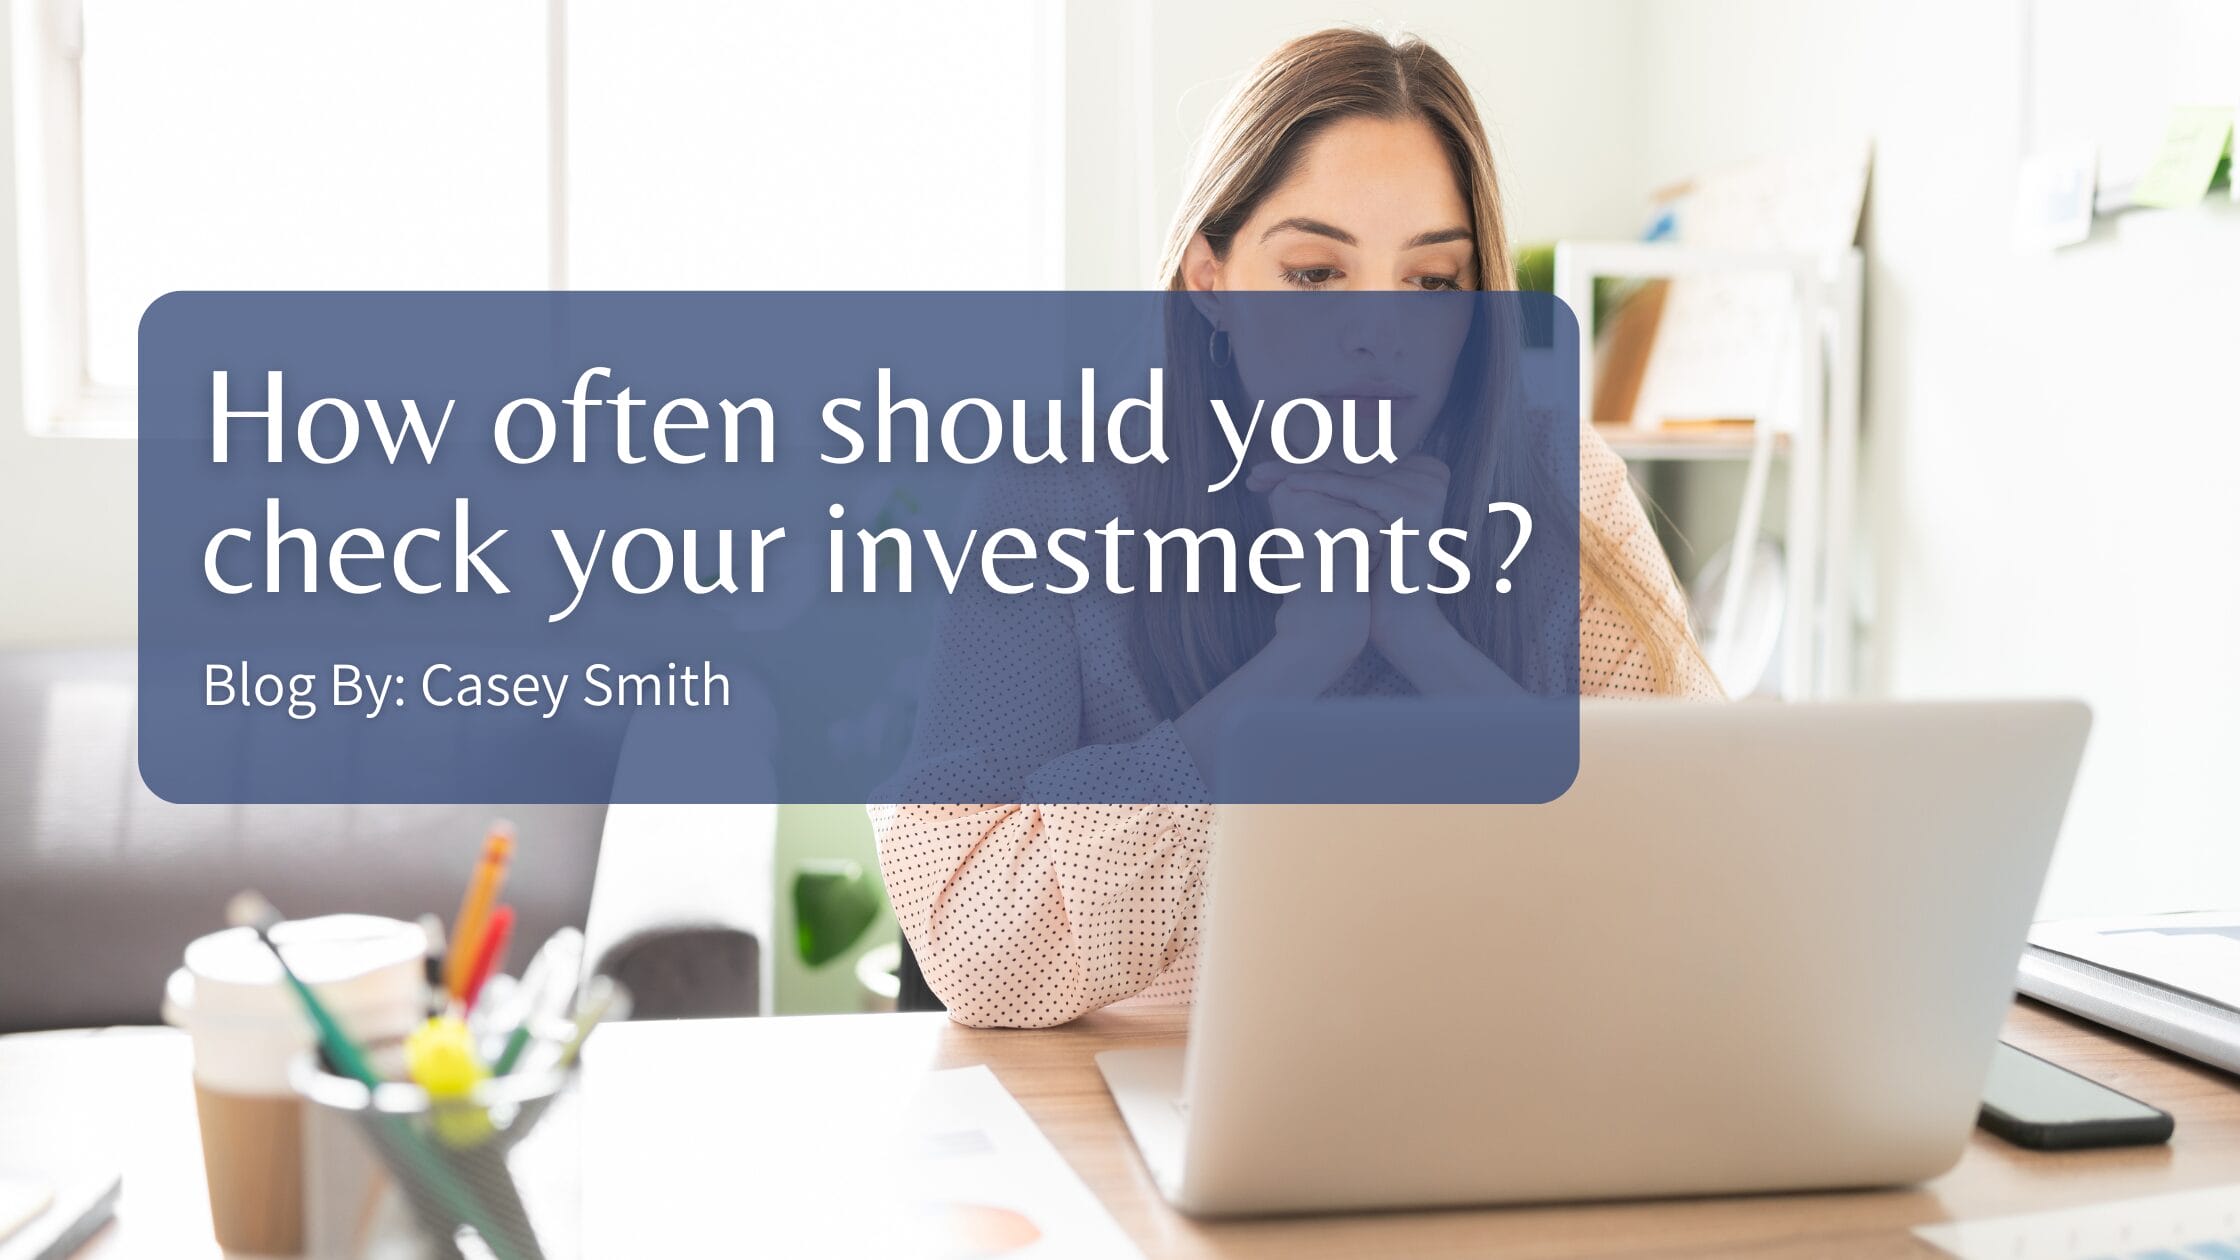 How often should you check your investments?